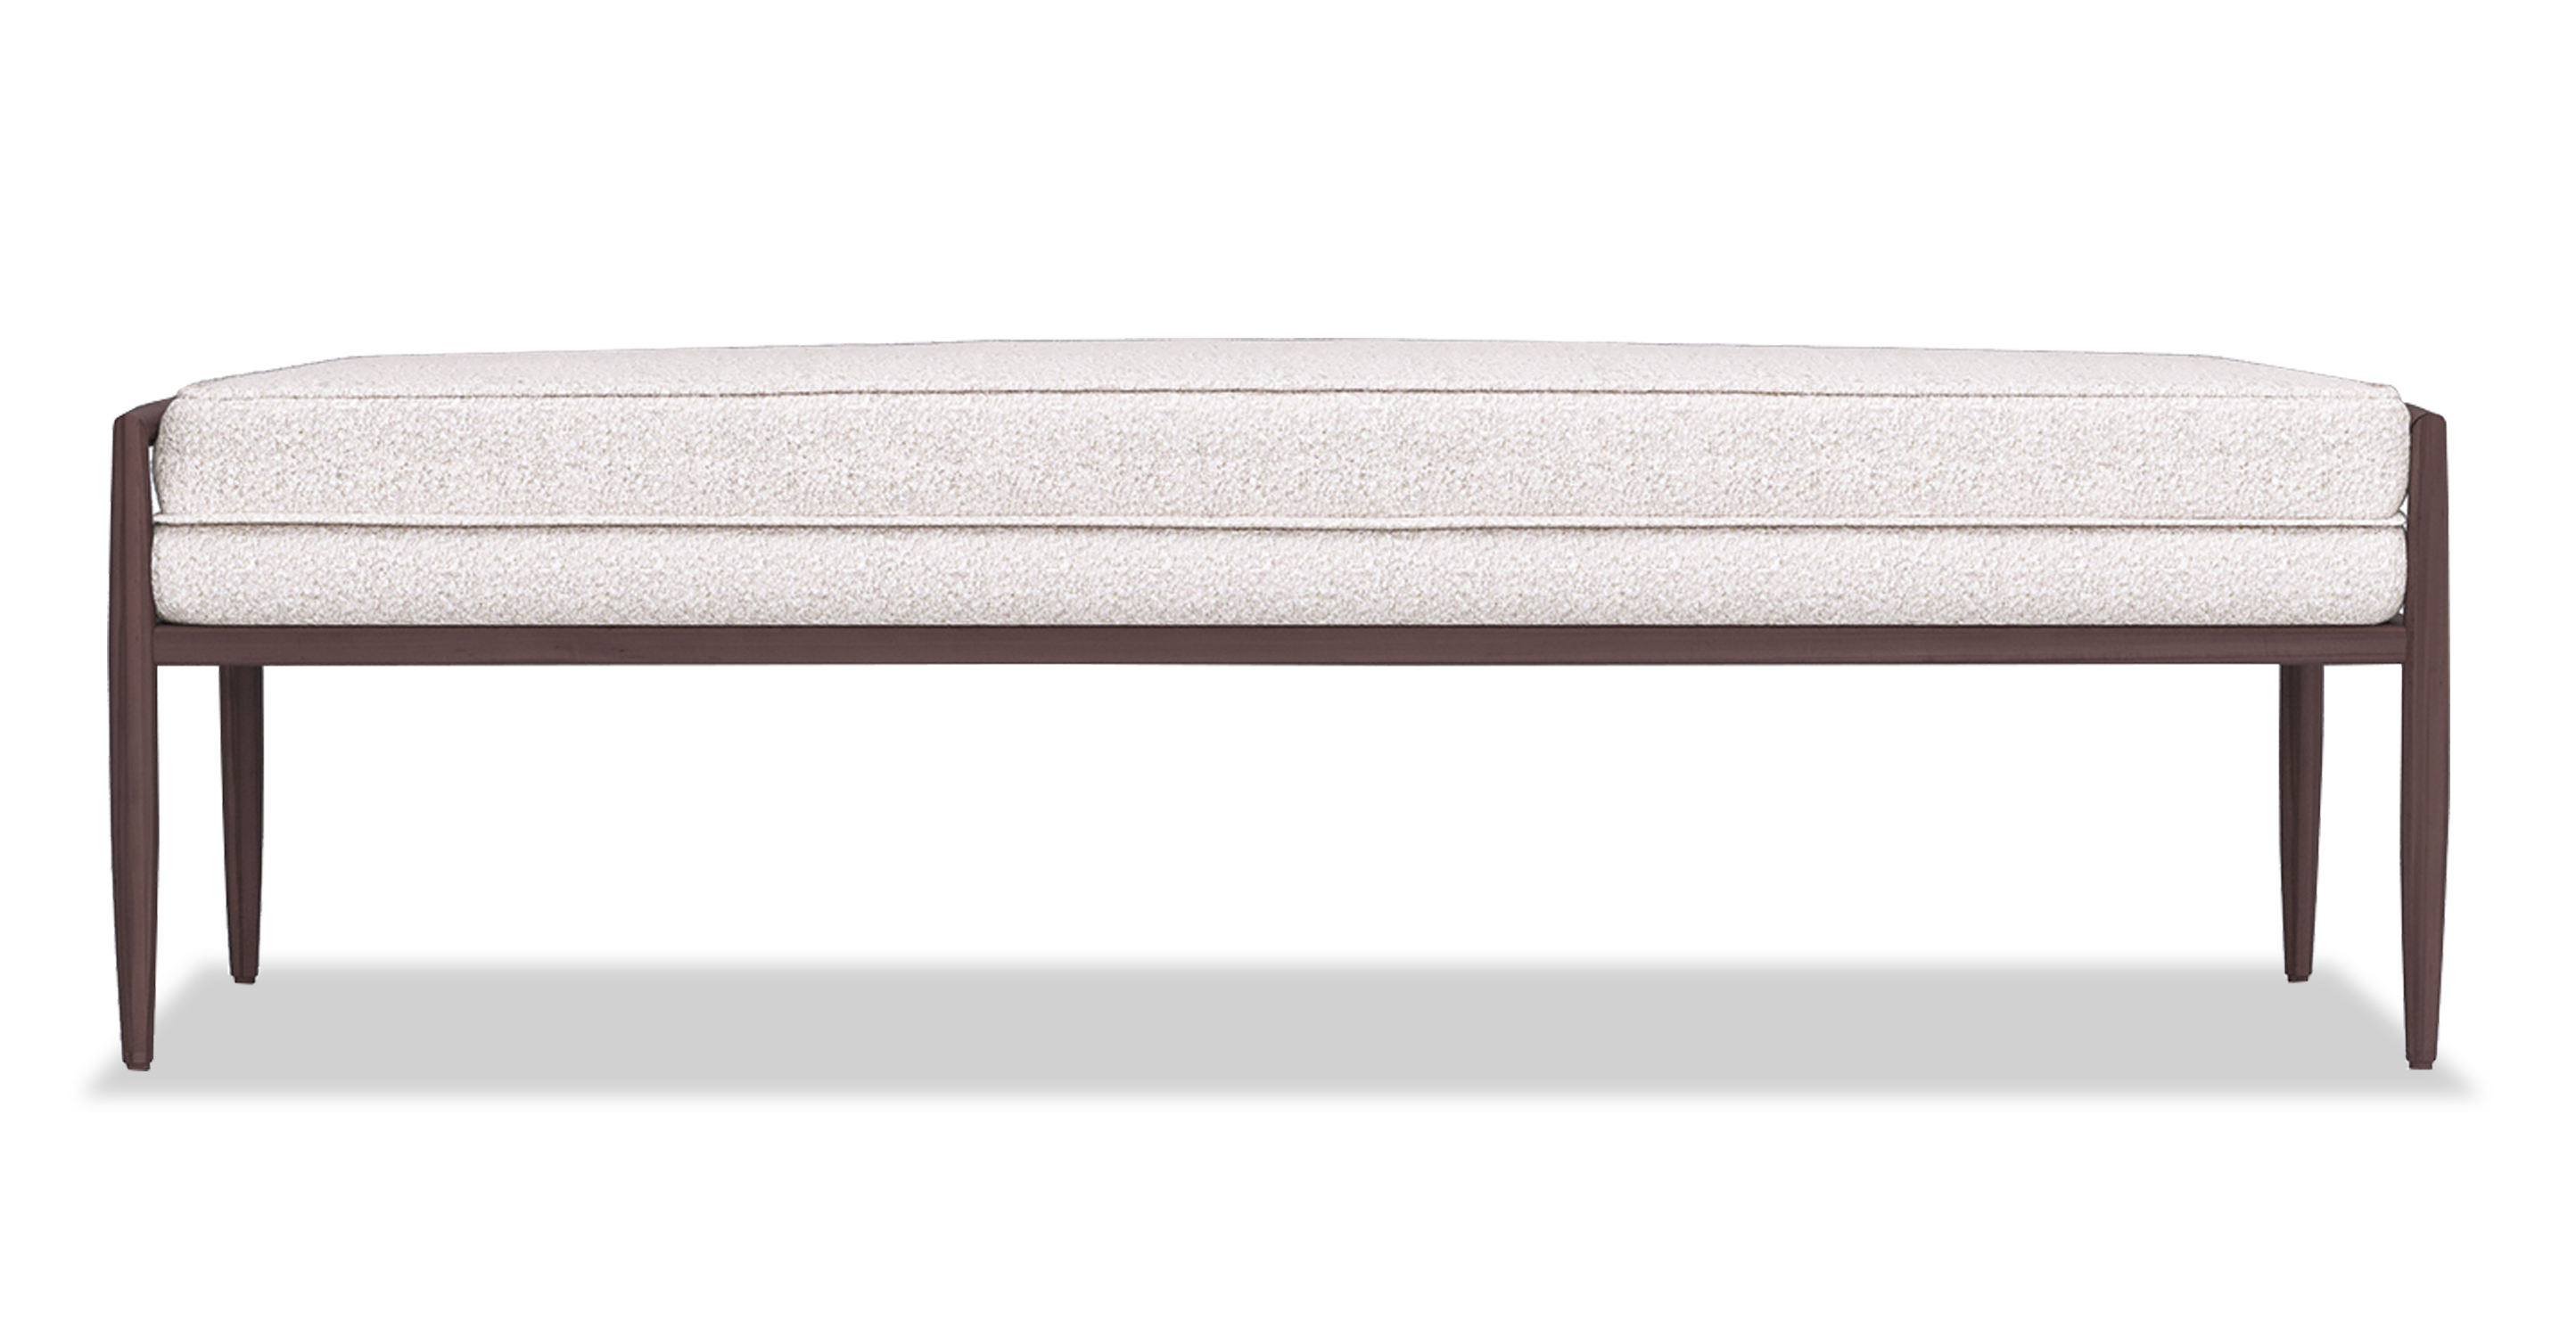 The Fritz Cream sitting bench showcases an exposed walnut wooden frame on the sides and under the cushion, which seamlessly connects to tapered legs. The cushion provides a single seat that is 100% upholstered, offering a comfortable and stylish seating option. To add visual interest and create dimension, the cushion features mid-horizontal piping. This detailing not only enhances the aesthetics of the bench but also adds a touch of sophistication to its design. With its combination of an exposed wooden frame, tapered legs, and upholstered cushion with piping, this bench exudes a blend of modern and classic elements, making it an attractive and versatile piece for various living spaces.